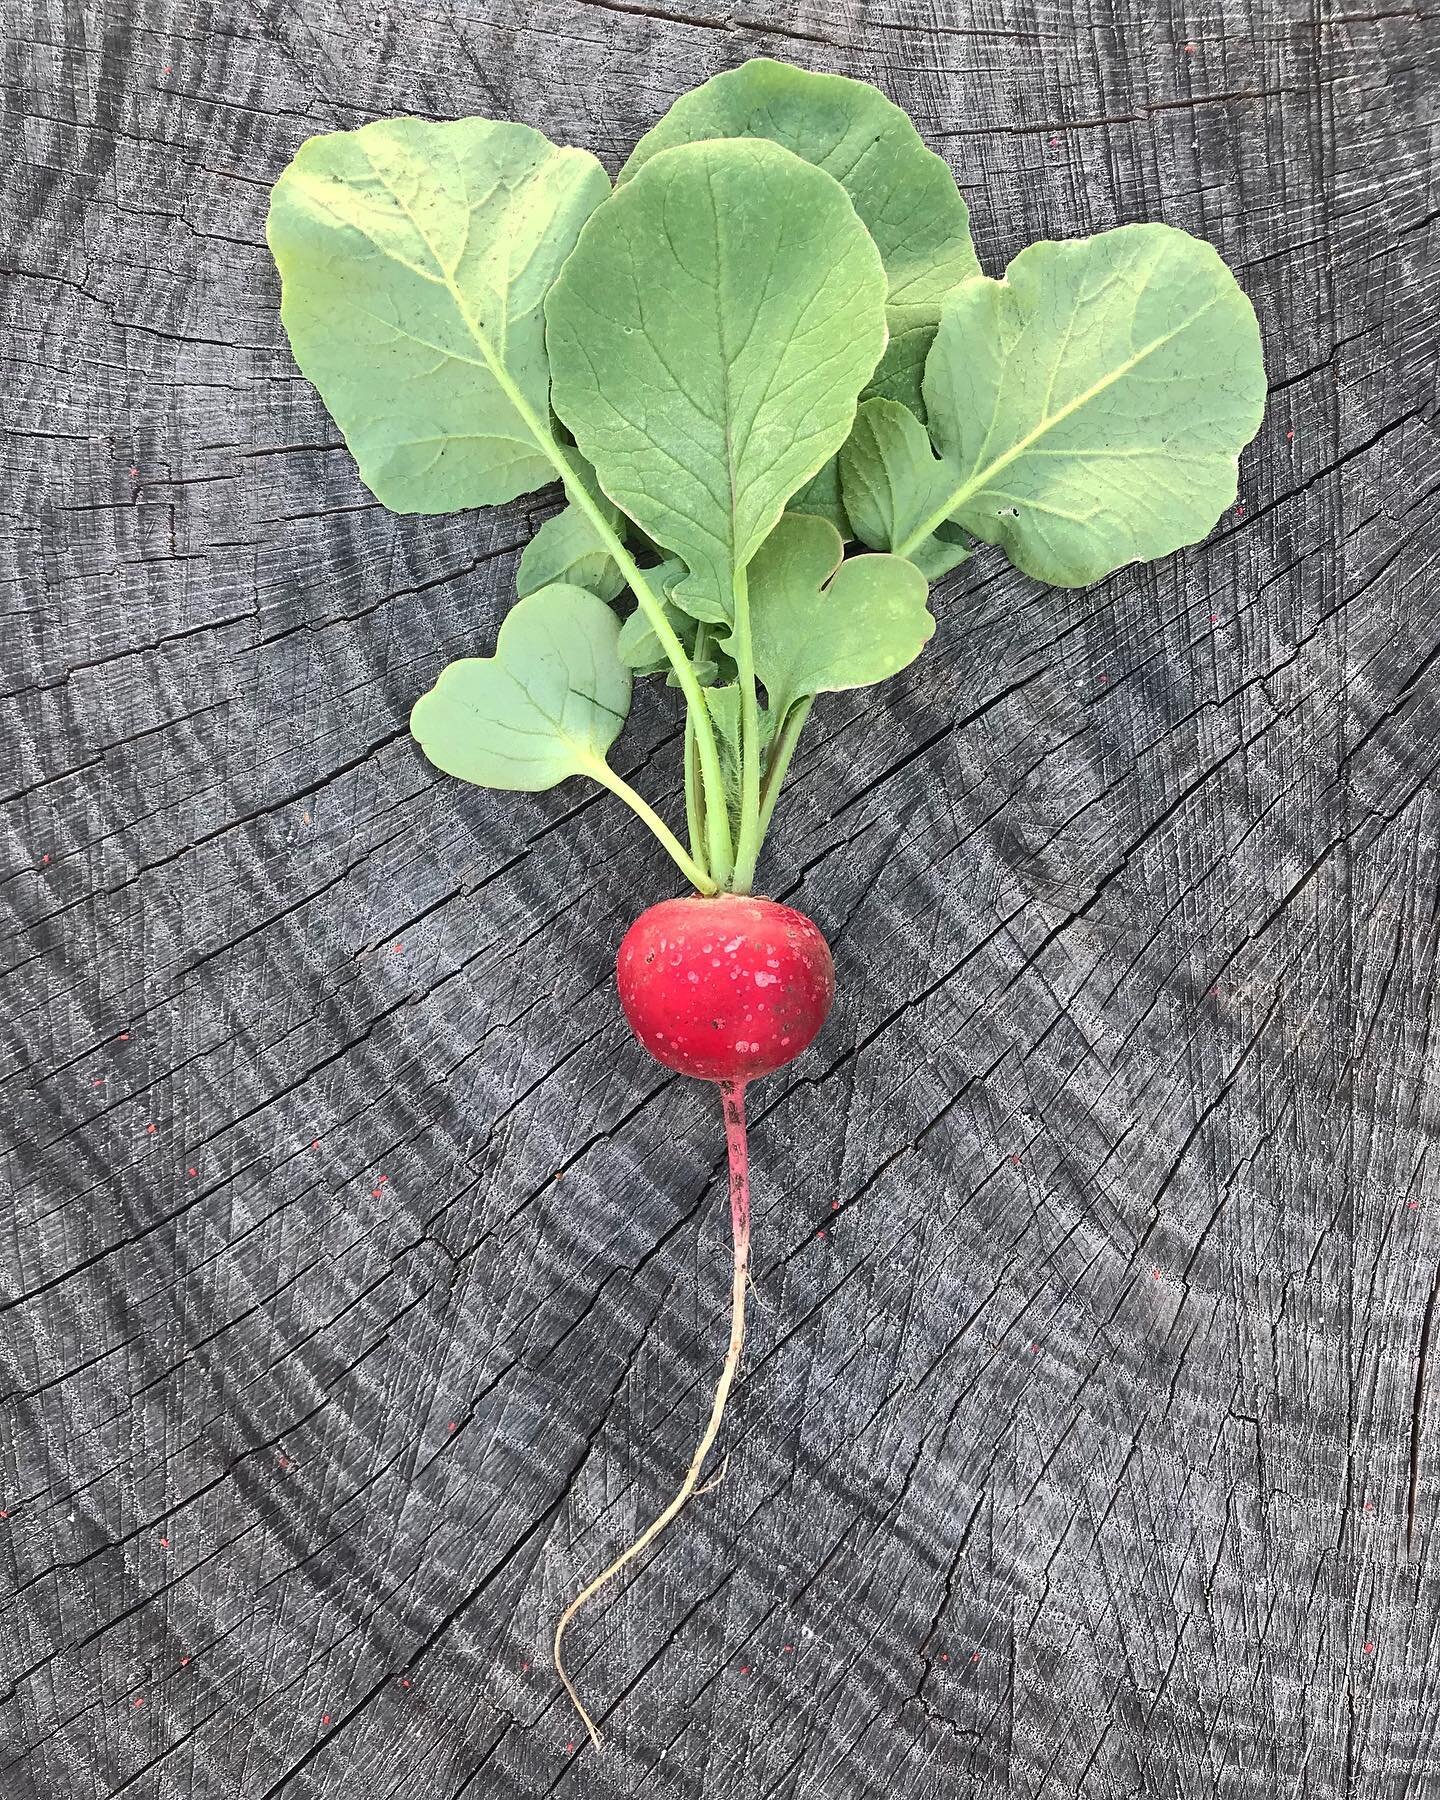 Current state not unlike a radish &mdash; bitter, sharp, feeling small. Strong roots but plucked from the ground unexpectedly. Thinly sliced, hoping to find a bed of greens so I can feel at home again. #gardenmetaphors #vegetables #homegrown #pretent